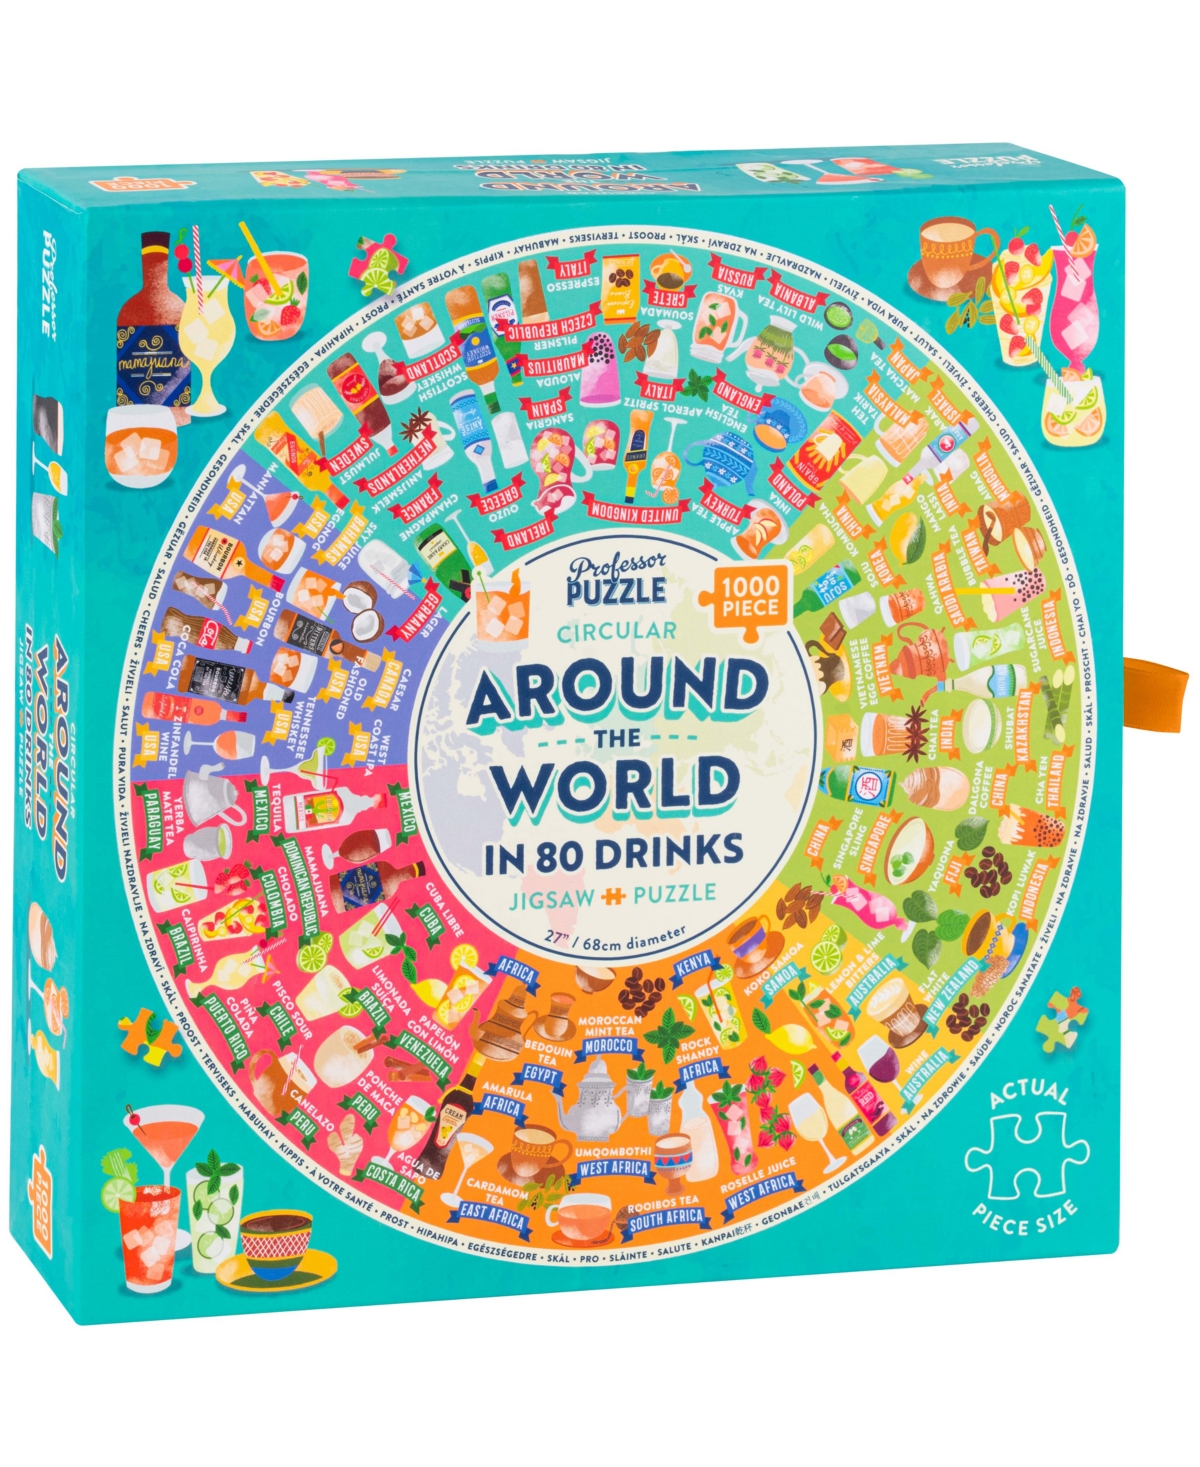 Professor Puzzle Kids' Around The World In 80 Drinks Circular Jigsaw Puzzle Set, 1002 Pieces In Multi Color